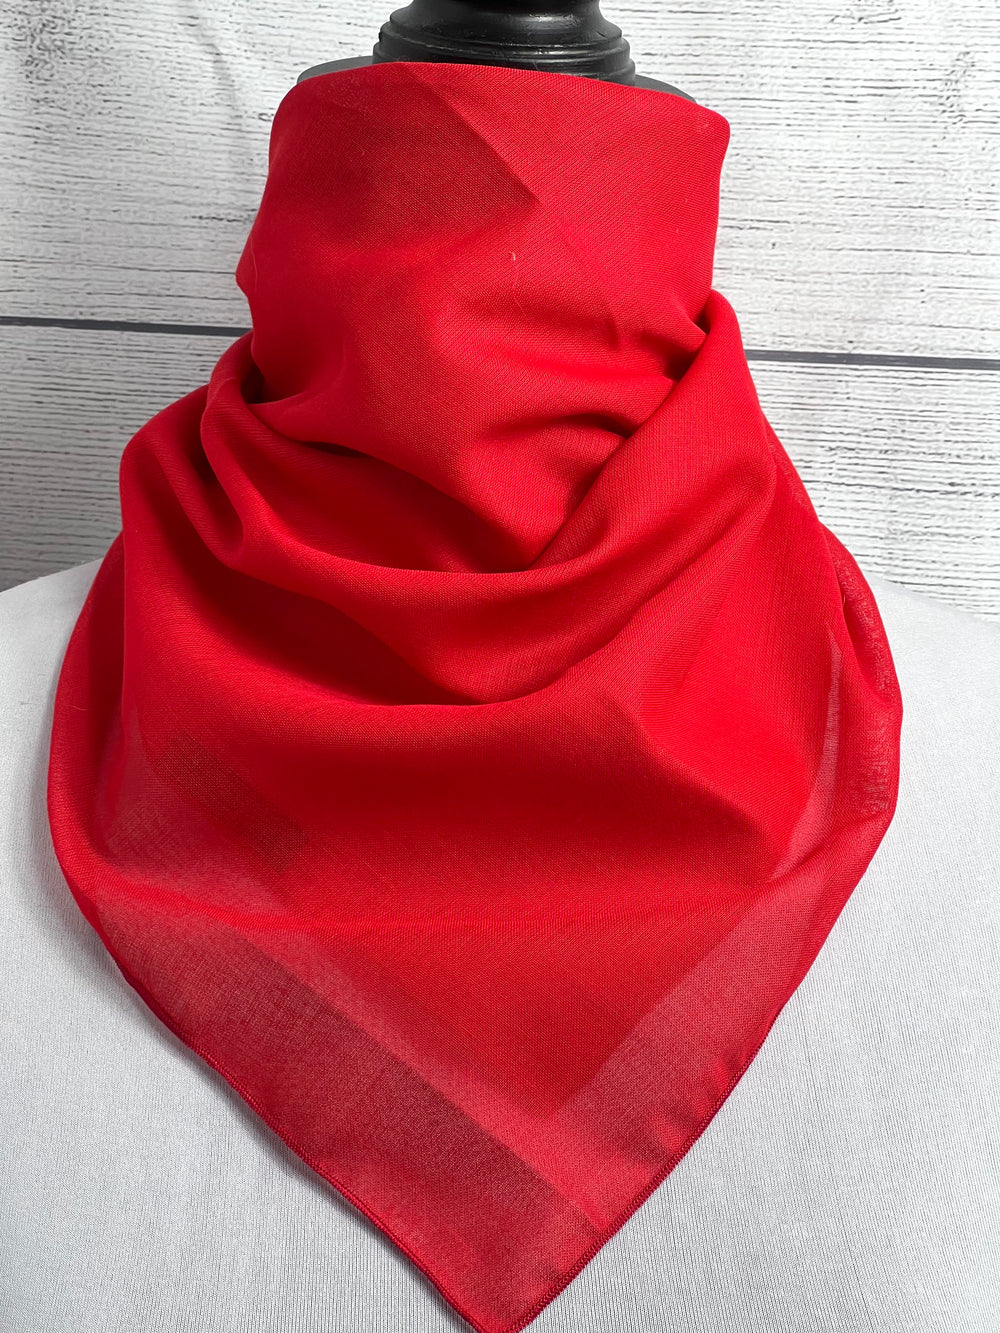 Solid Red Cotton Voile Bandana